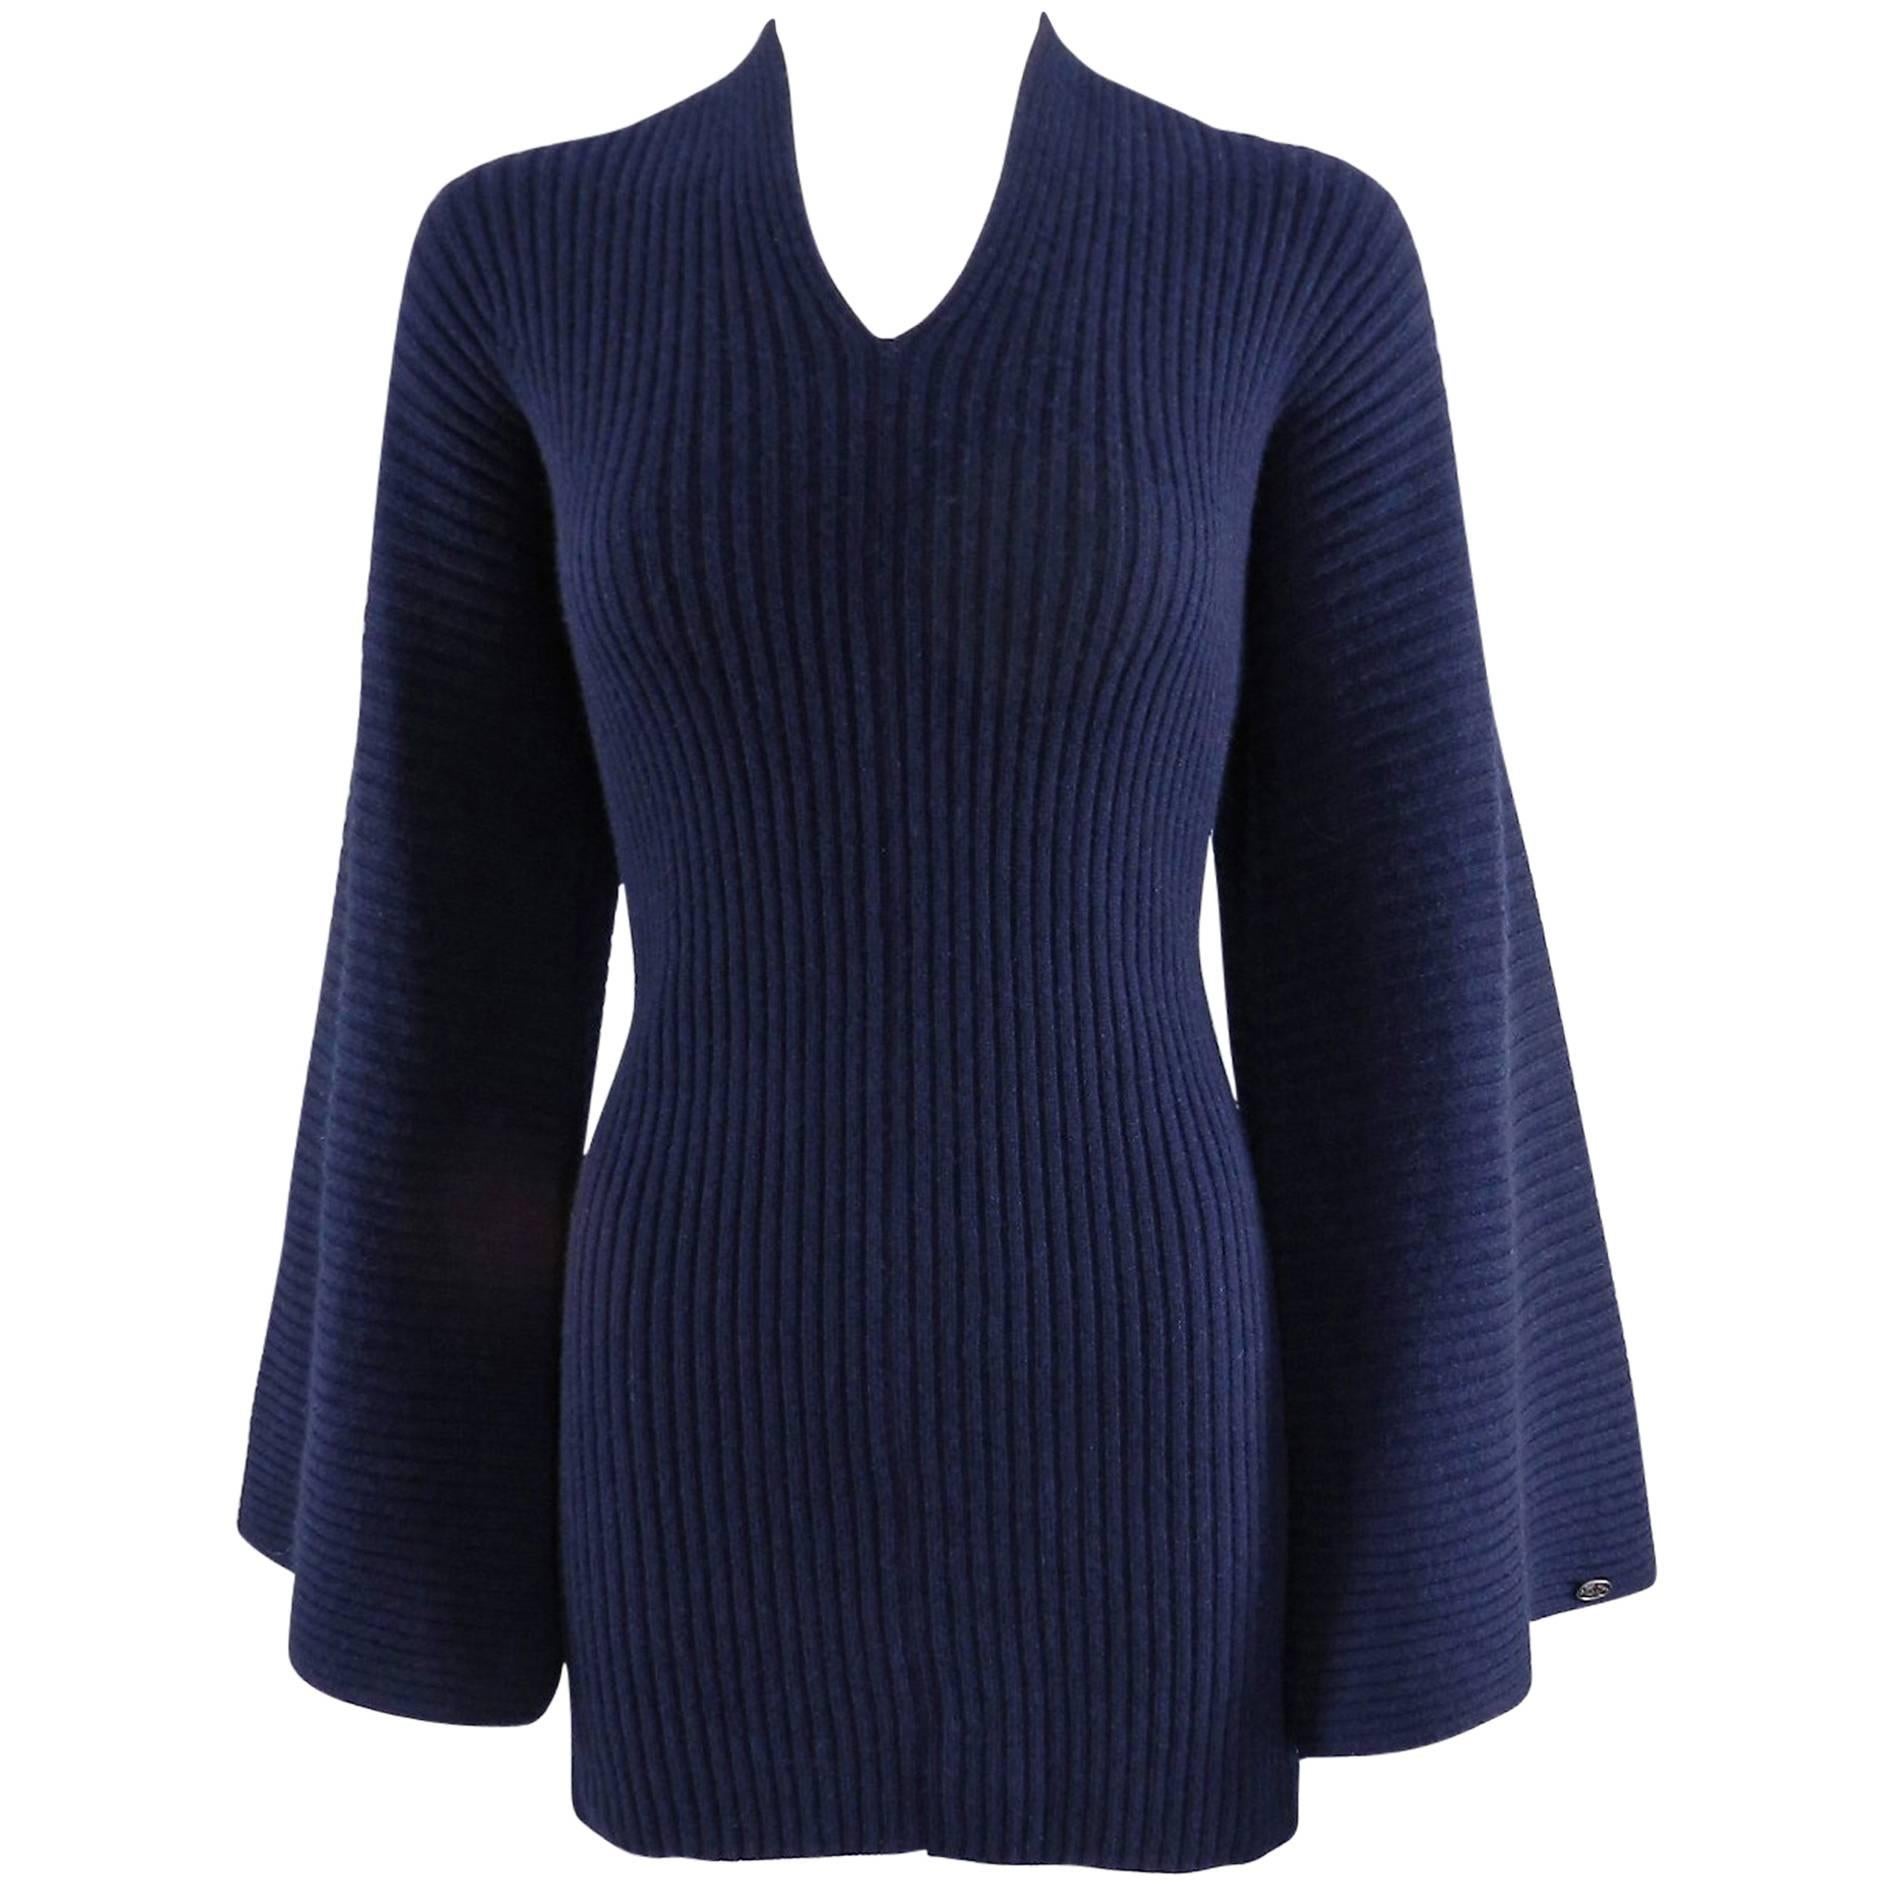 Chanel navy ribbed cashmere sweater with bell sleeves and knot back